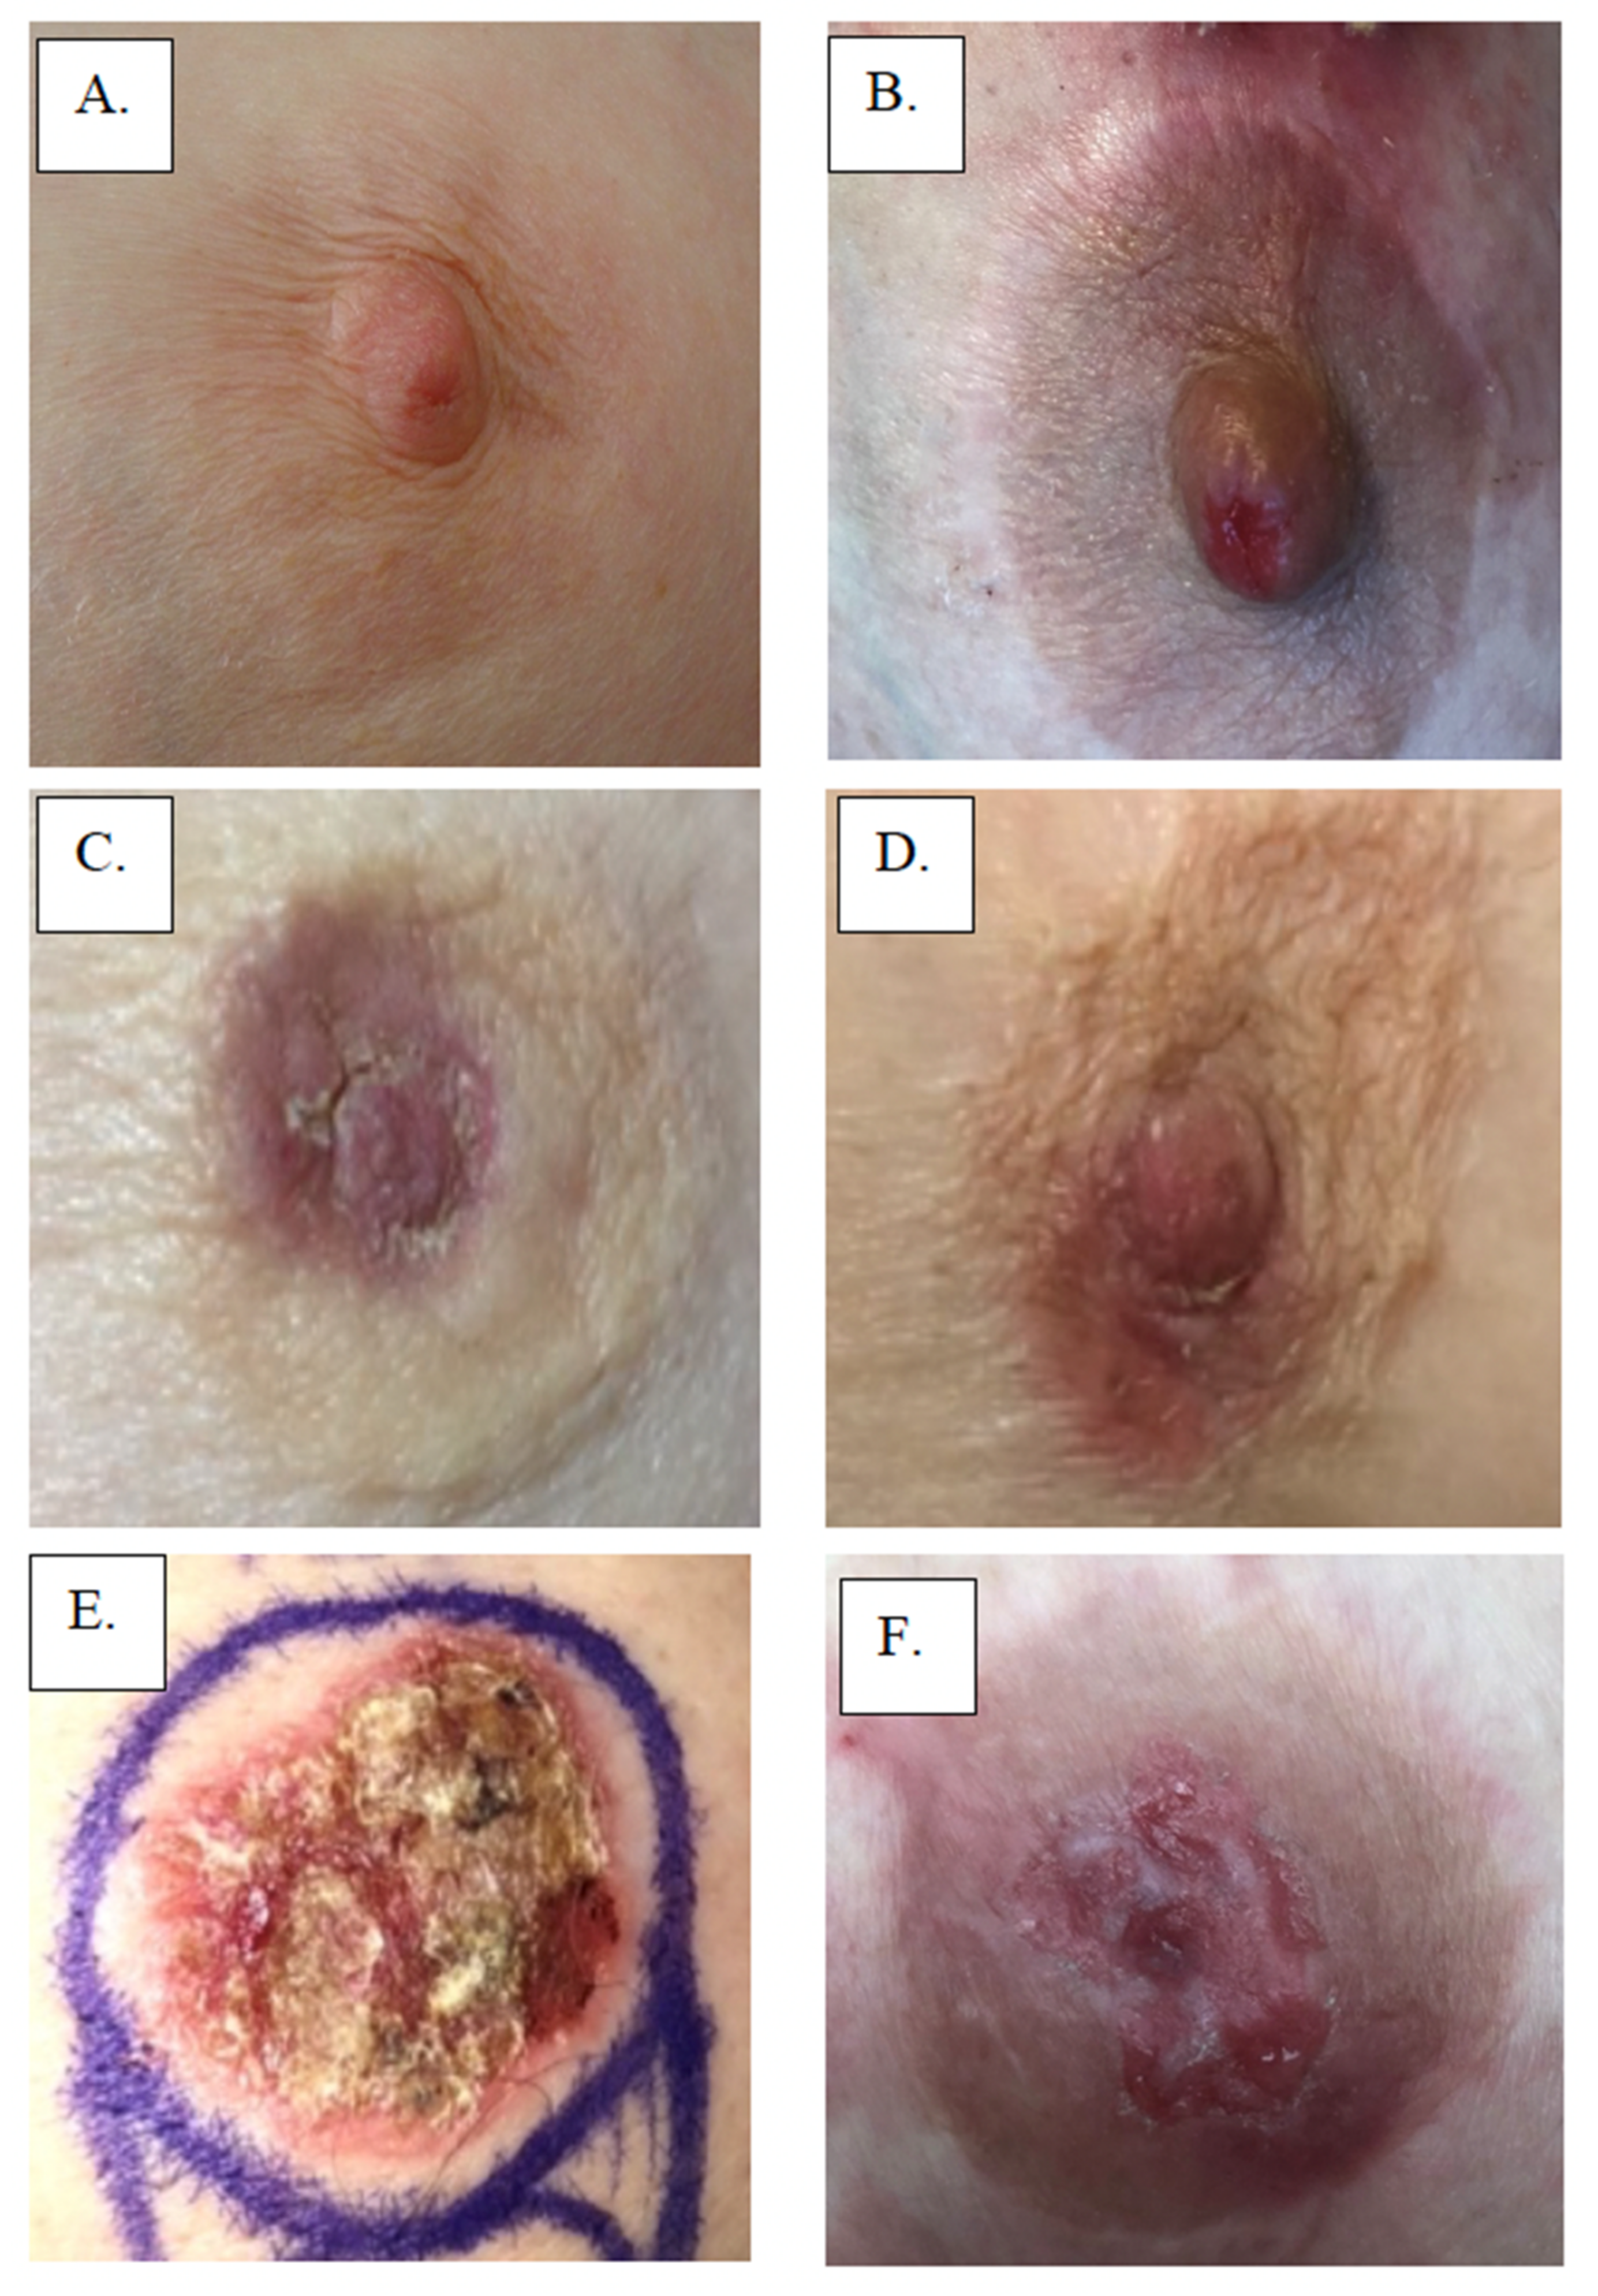 Eczema on Breast or Nipple: A Common Cause For Rash On Breast